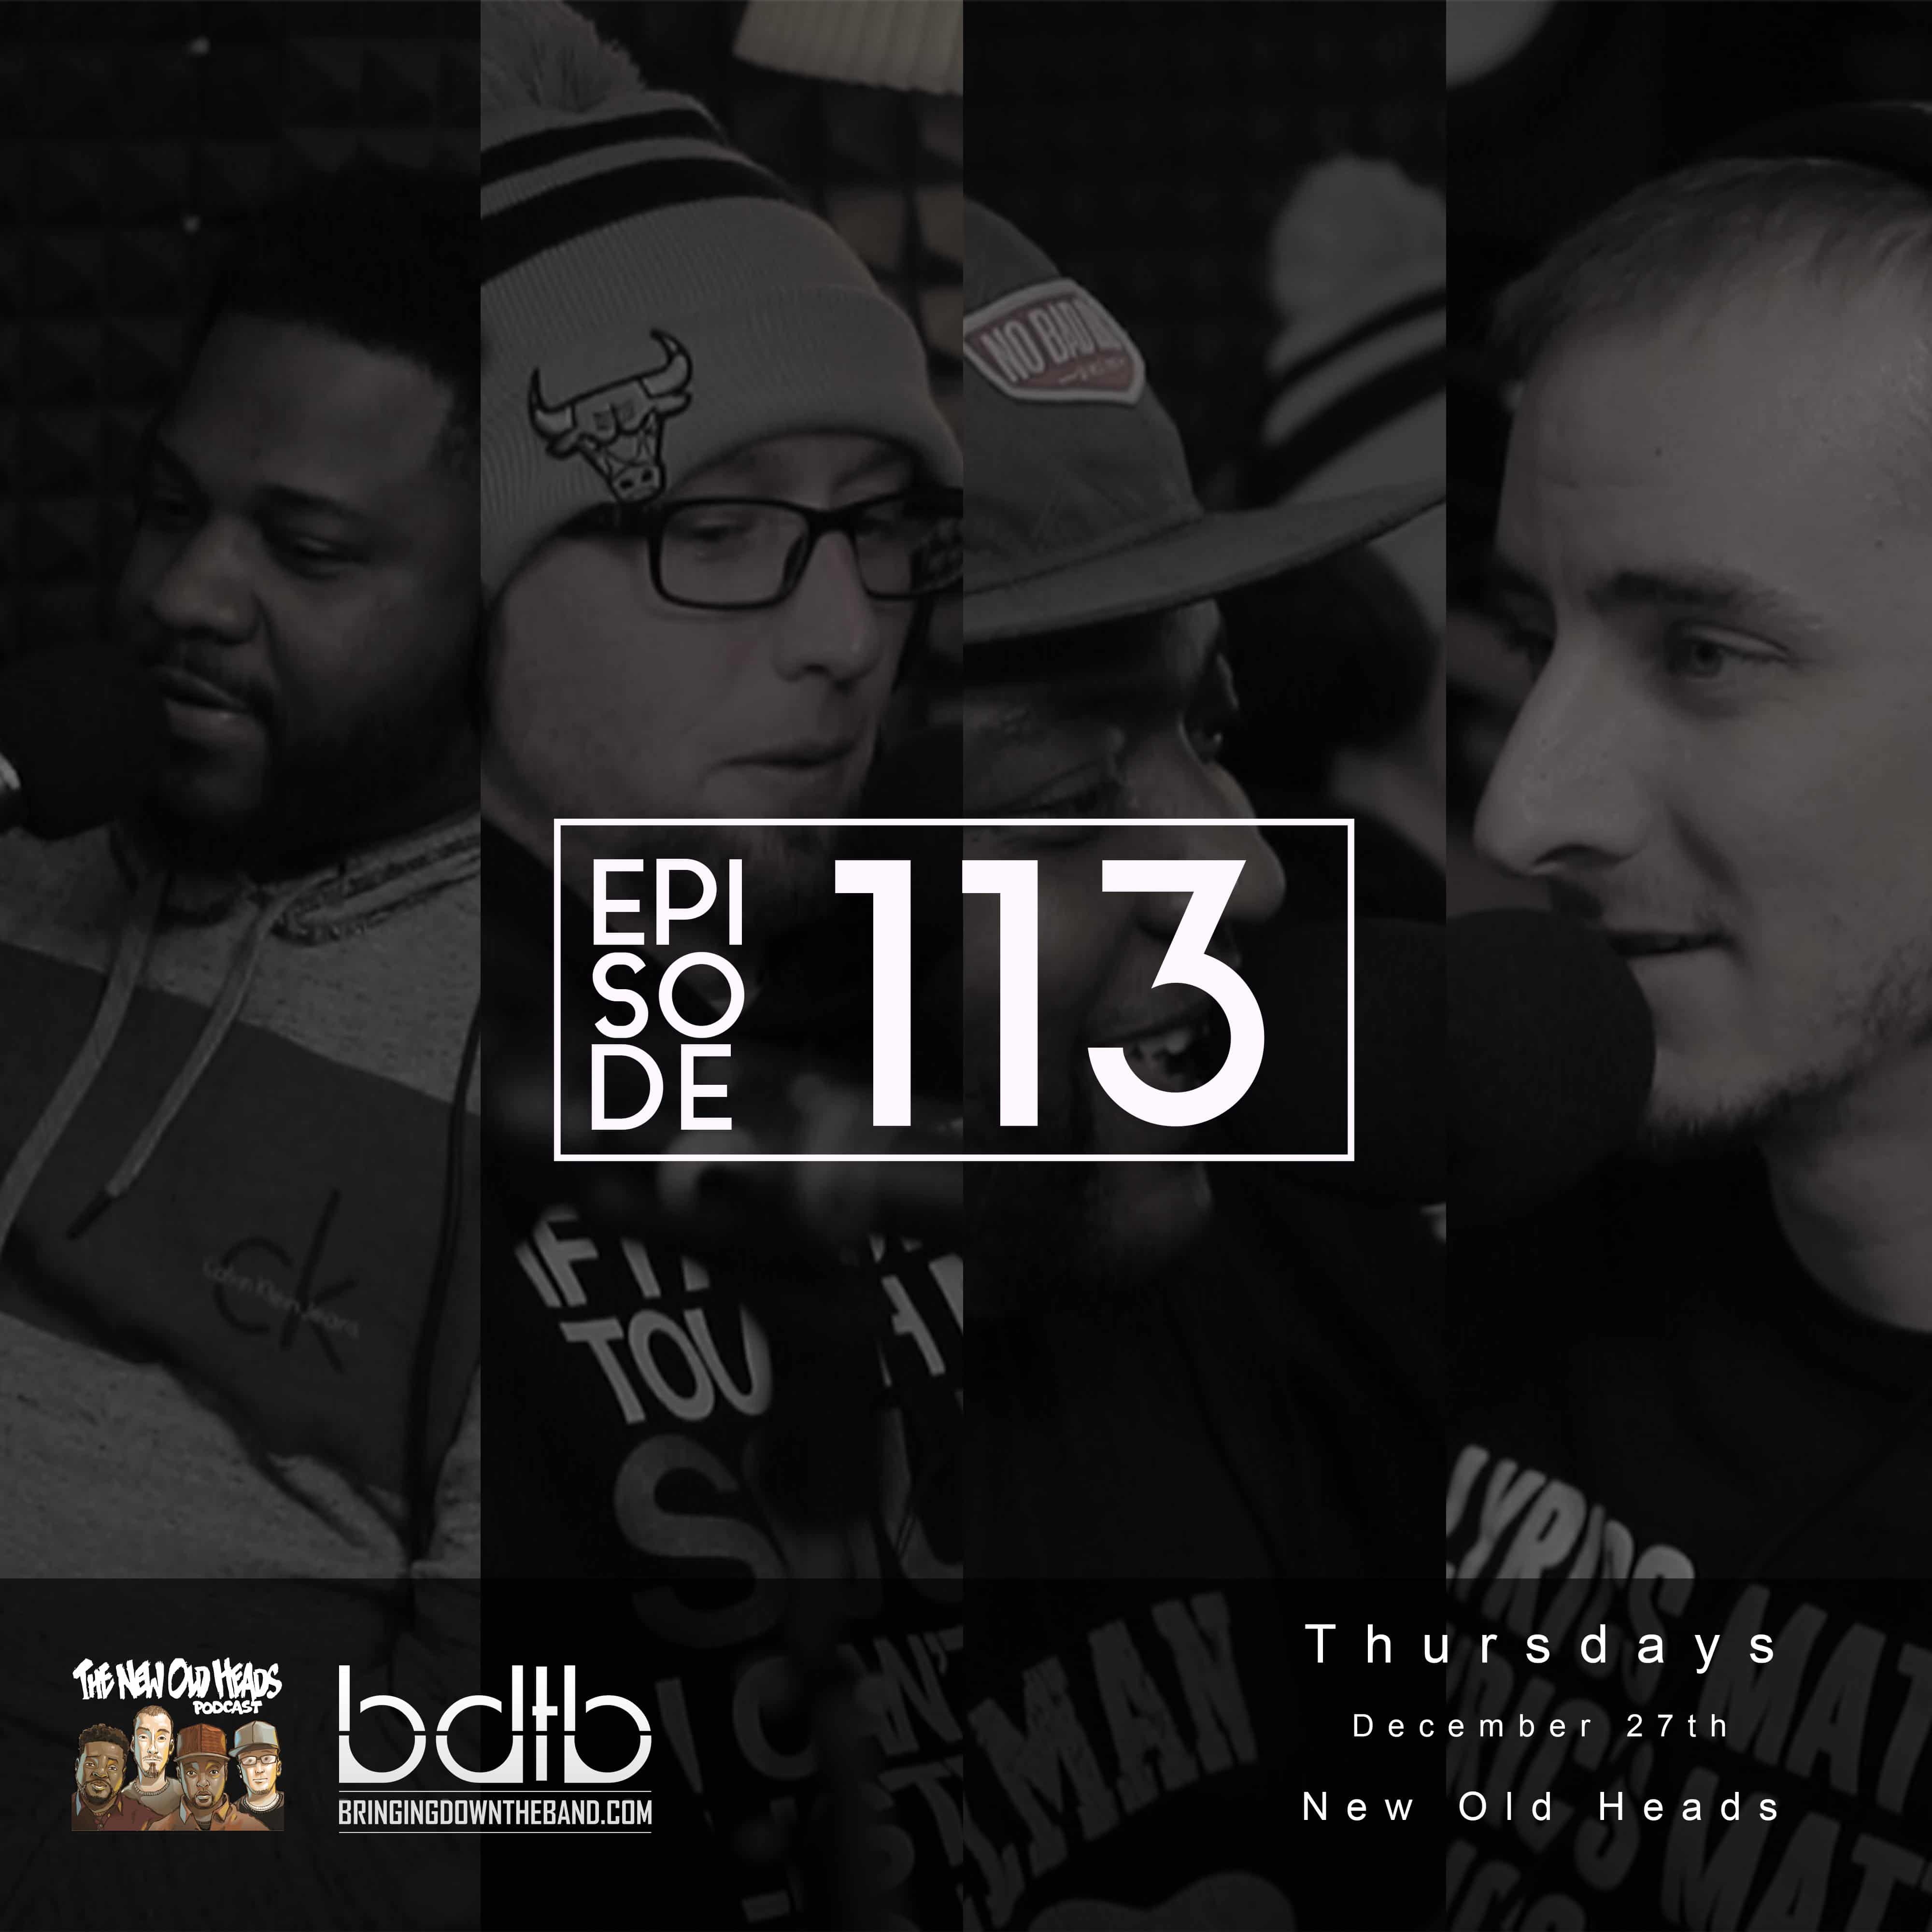 New Old Heads, Episode 113 (12/27/18) | Our Favorite Hip Hop Albums of 2018, Migos vs. Bone Thugs, "The Wall" Has A GoFundMe & More